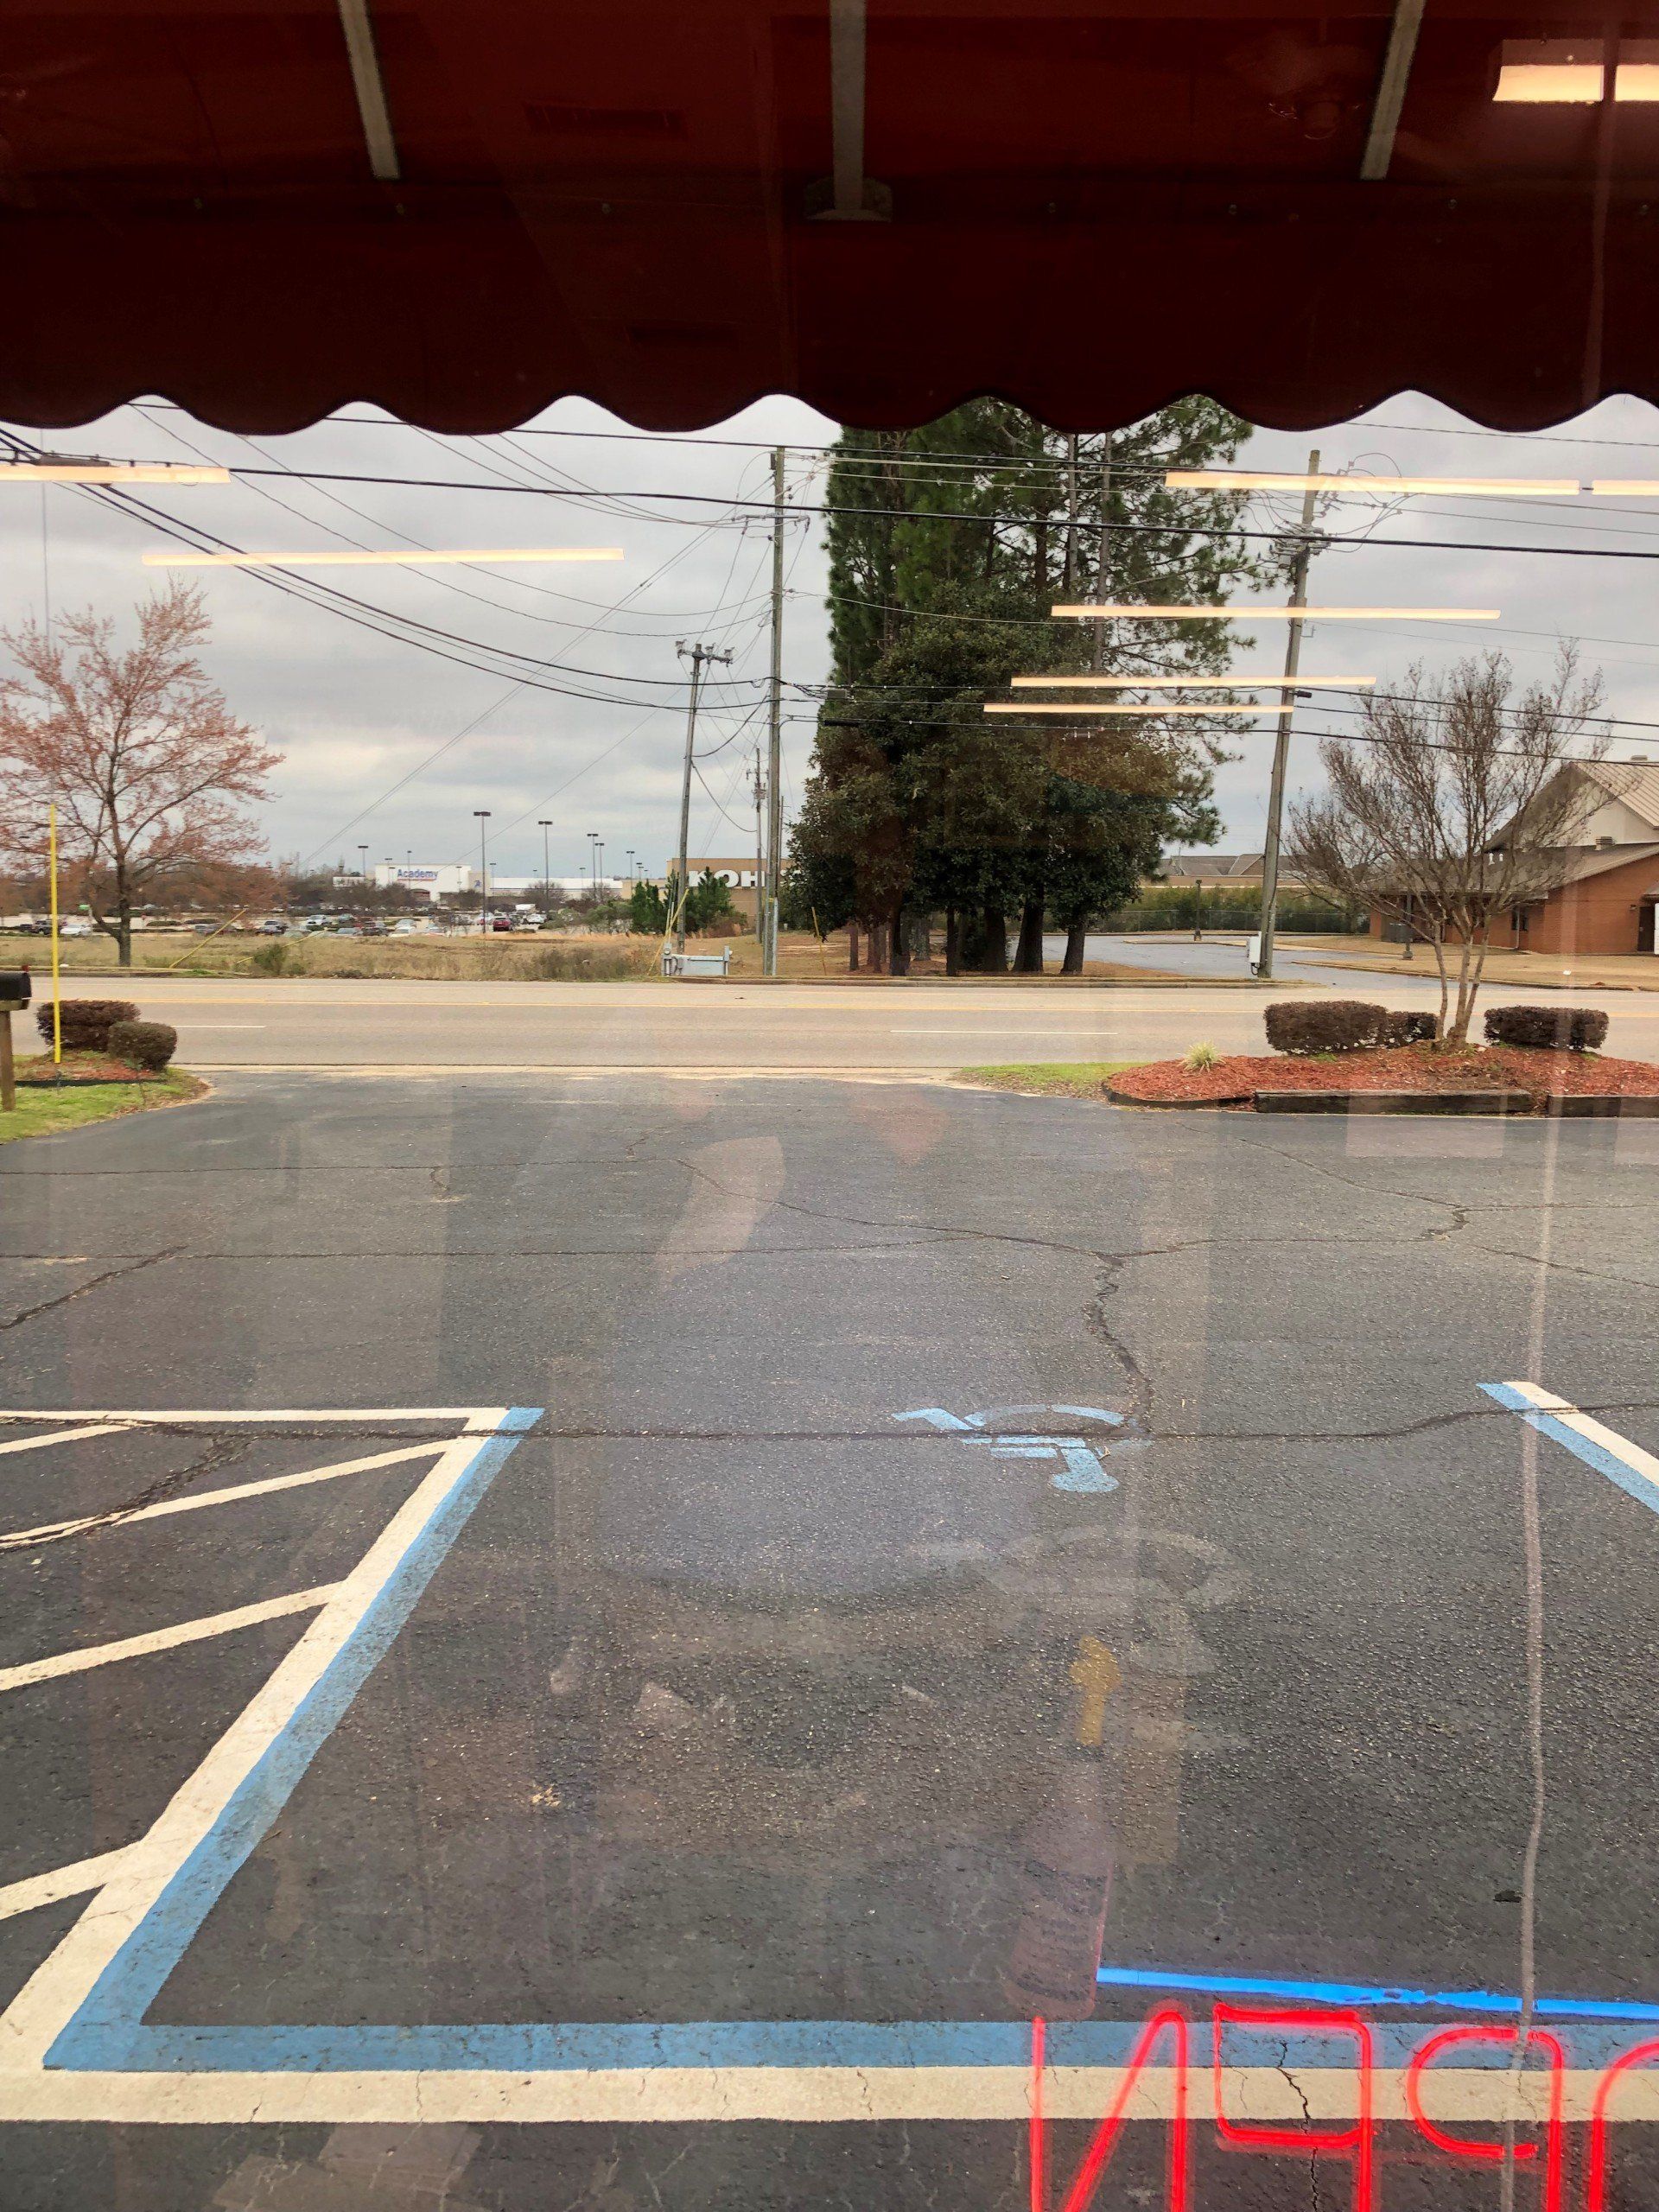 Store tint installation in Prattville AL on 1.14.2019 - AFTER generic tint removed and now looking out high clarity SPF Tinted business windows with UV protection